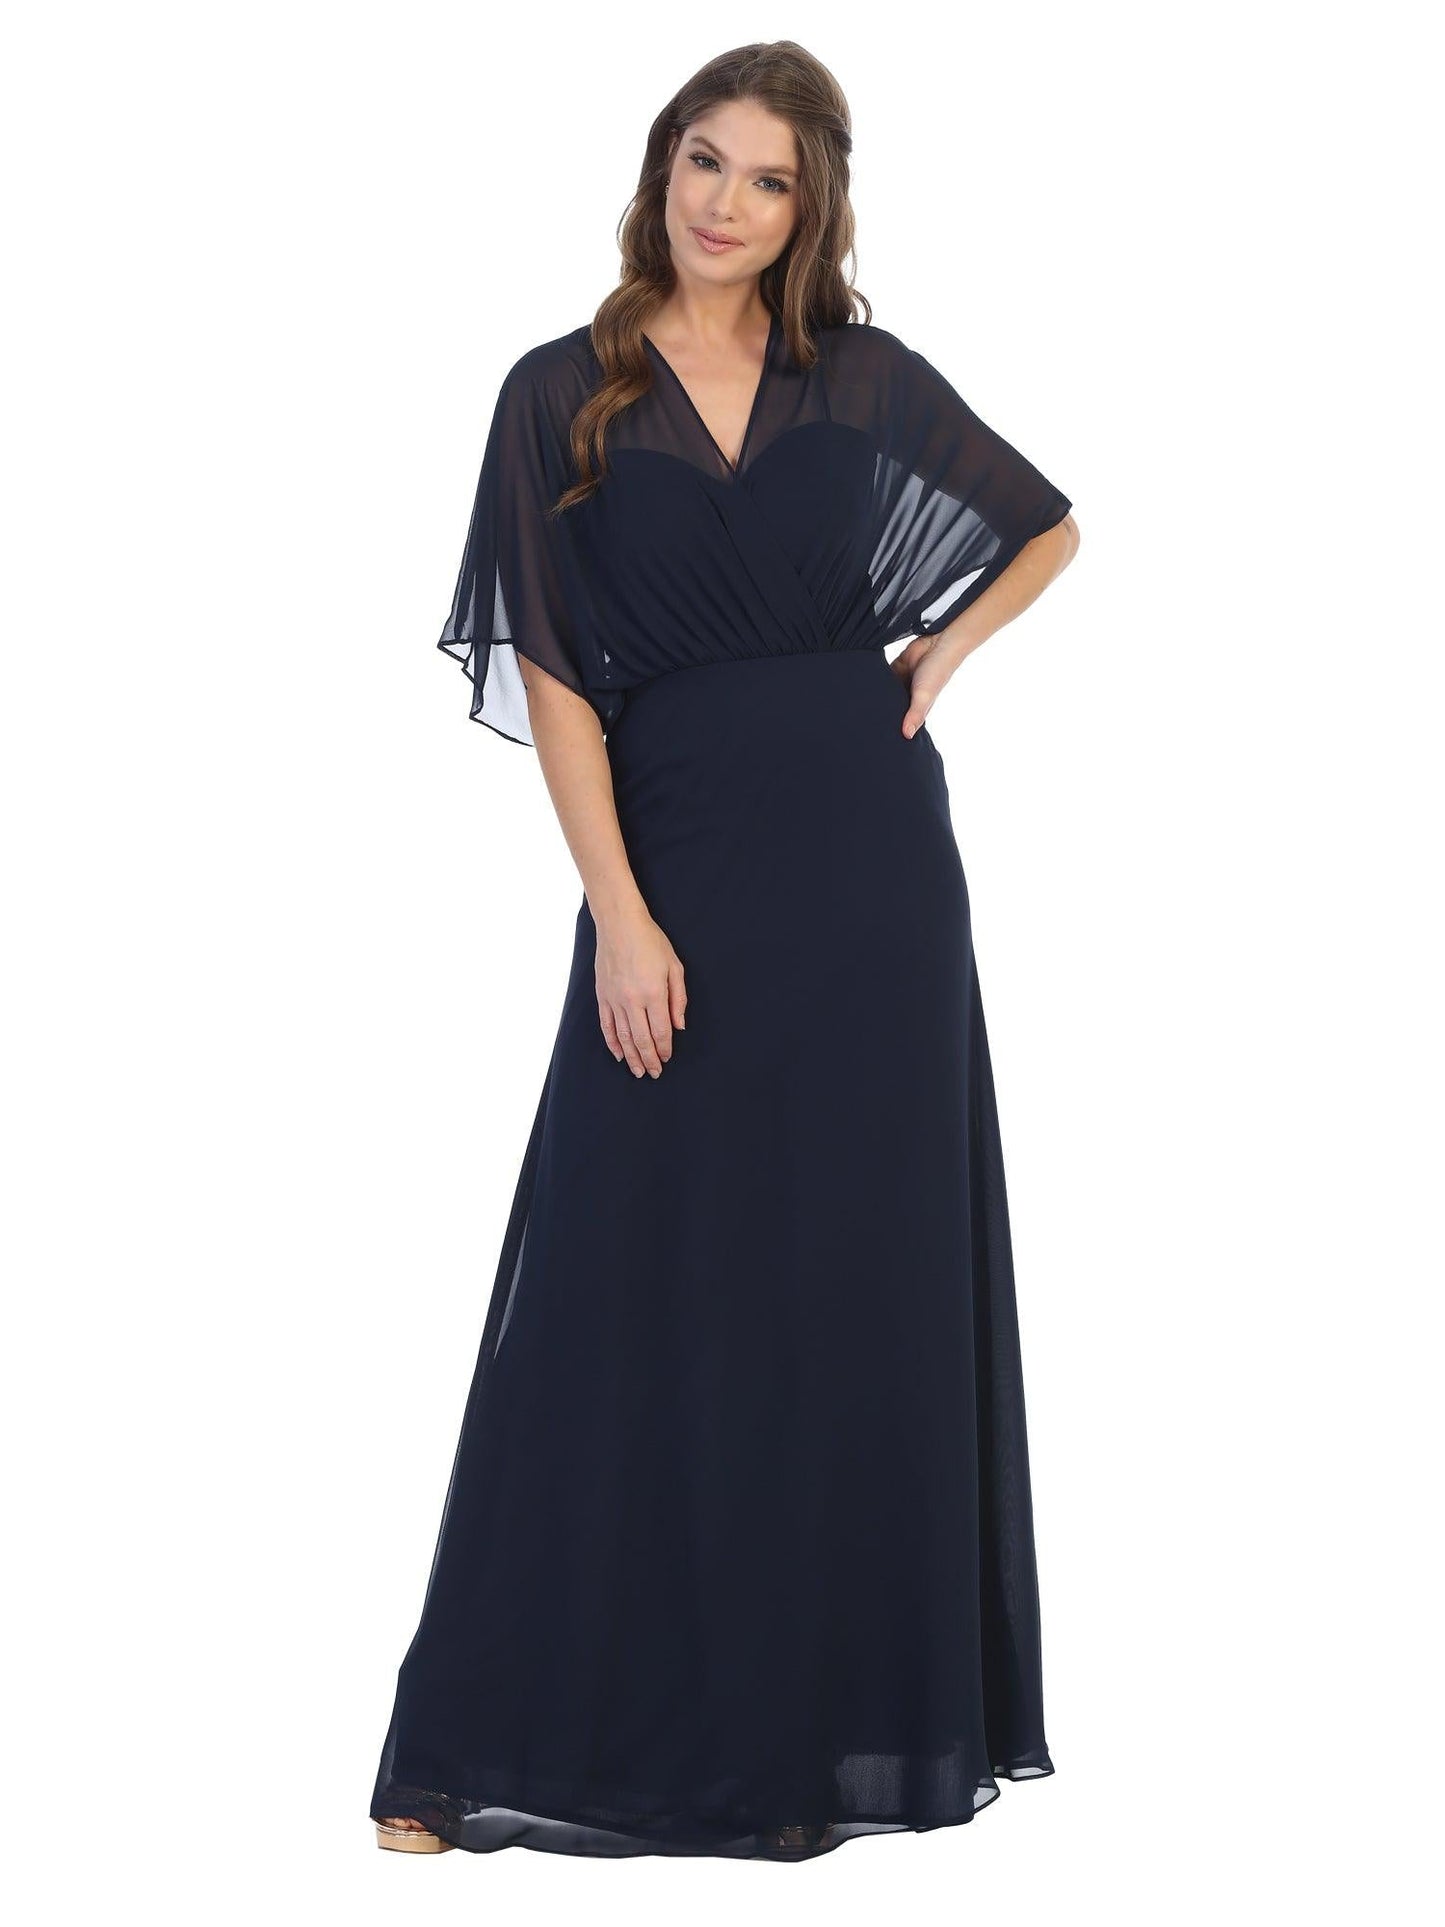 Long Formal Mother of the Bride Draped Chiffon Gown - The Dress Outlet